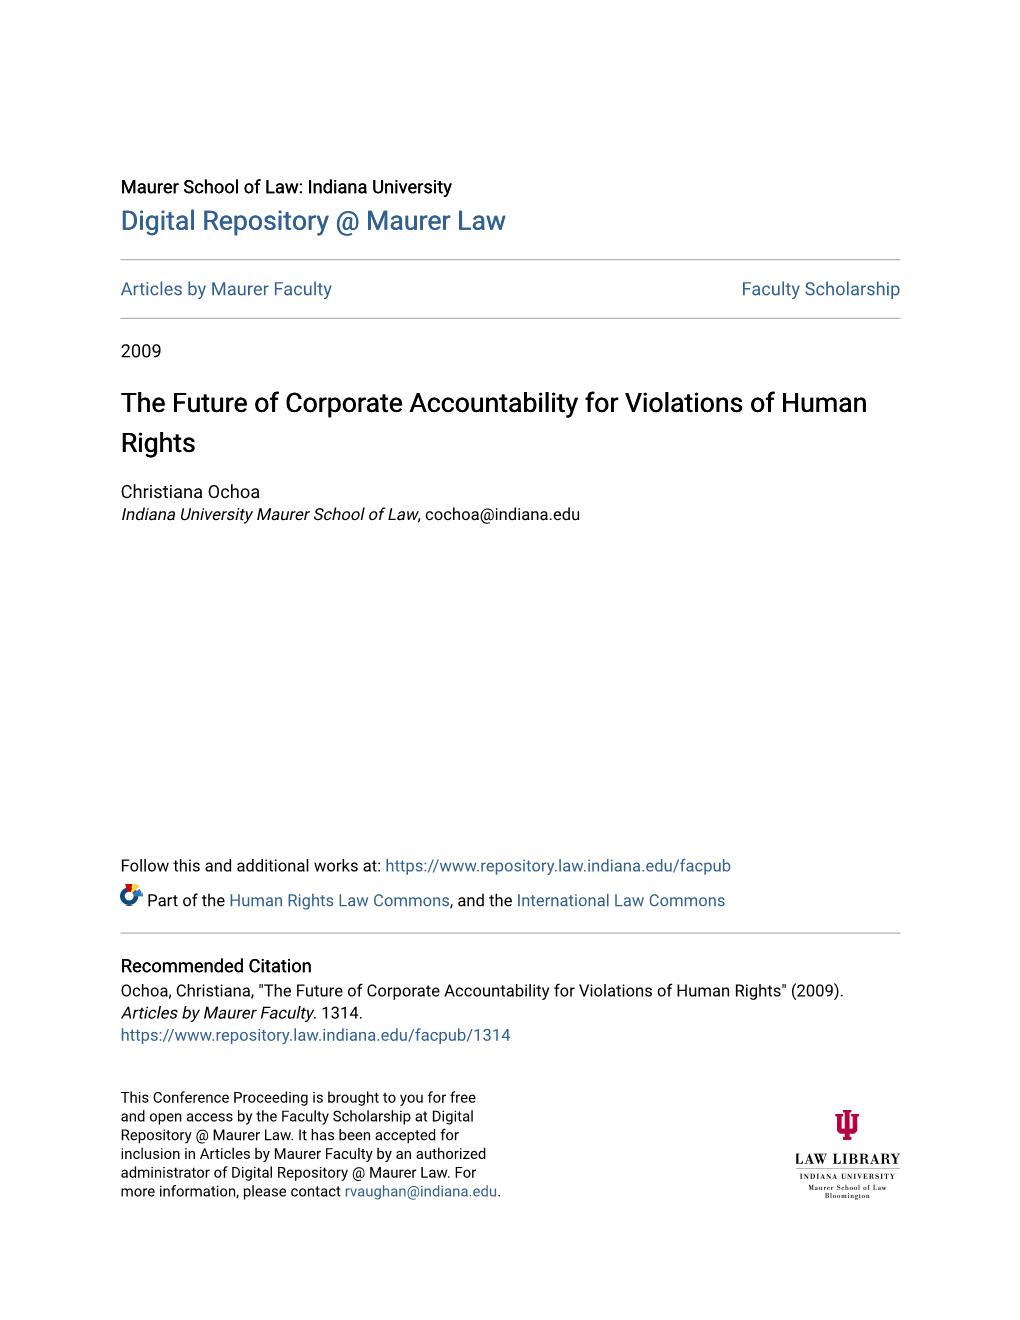 The Future of Corporate Accountability for Violations of Human Rights